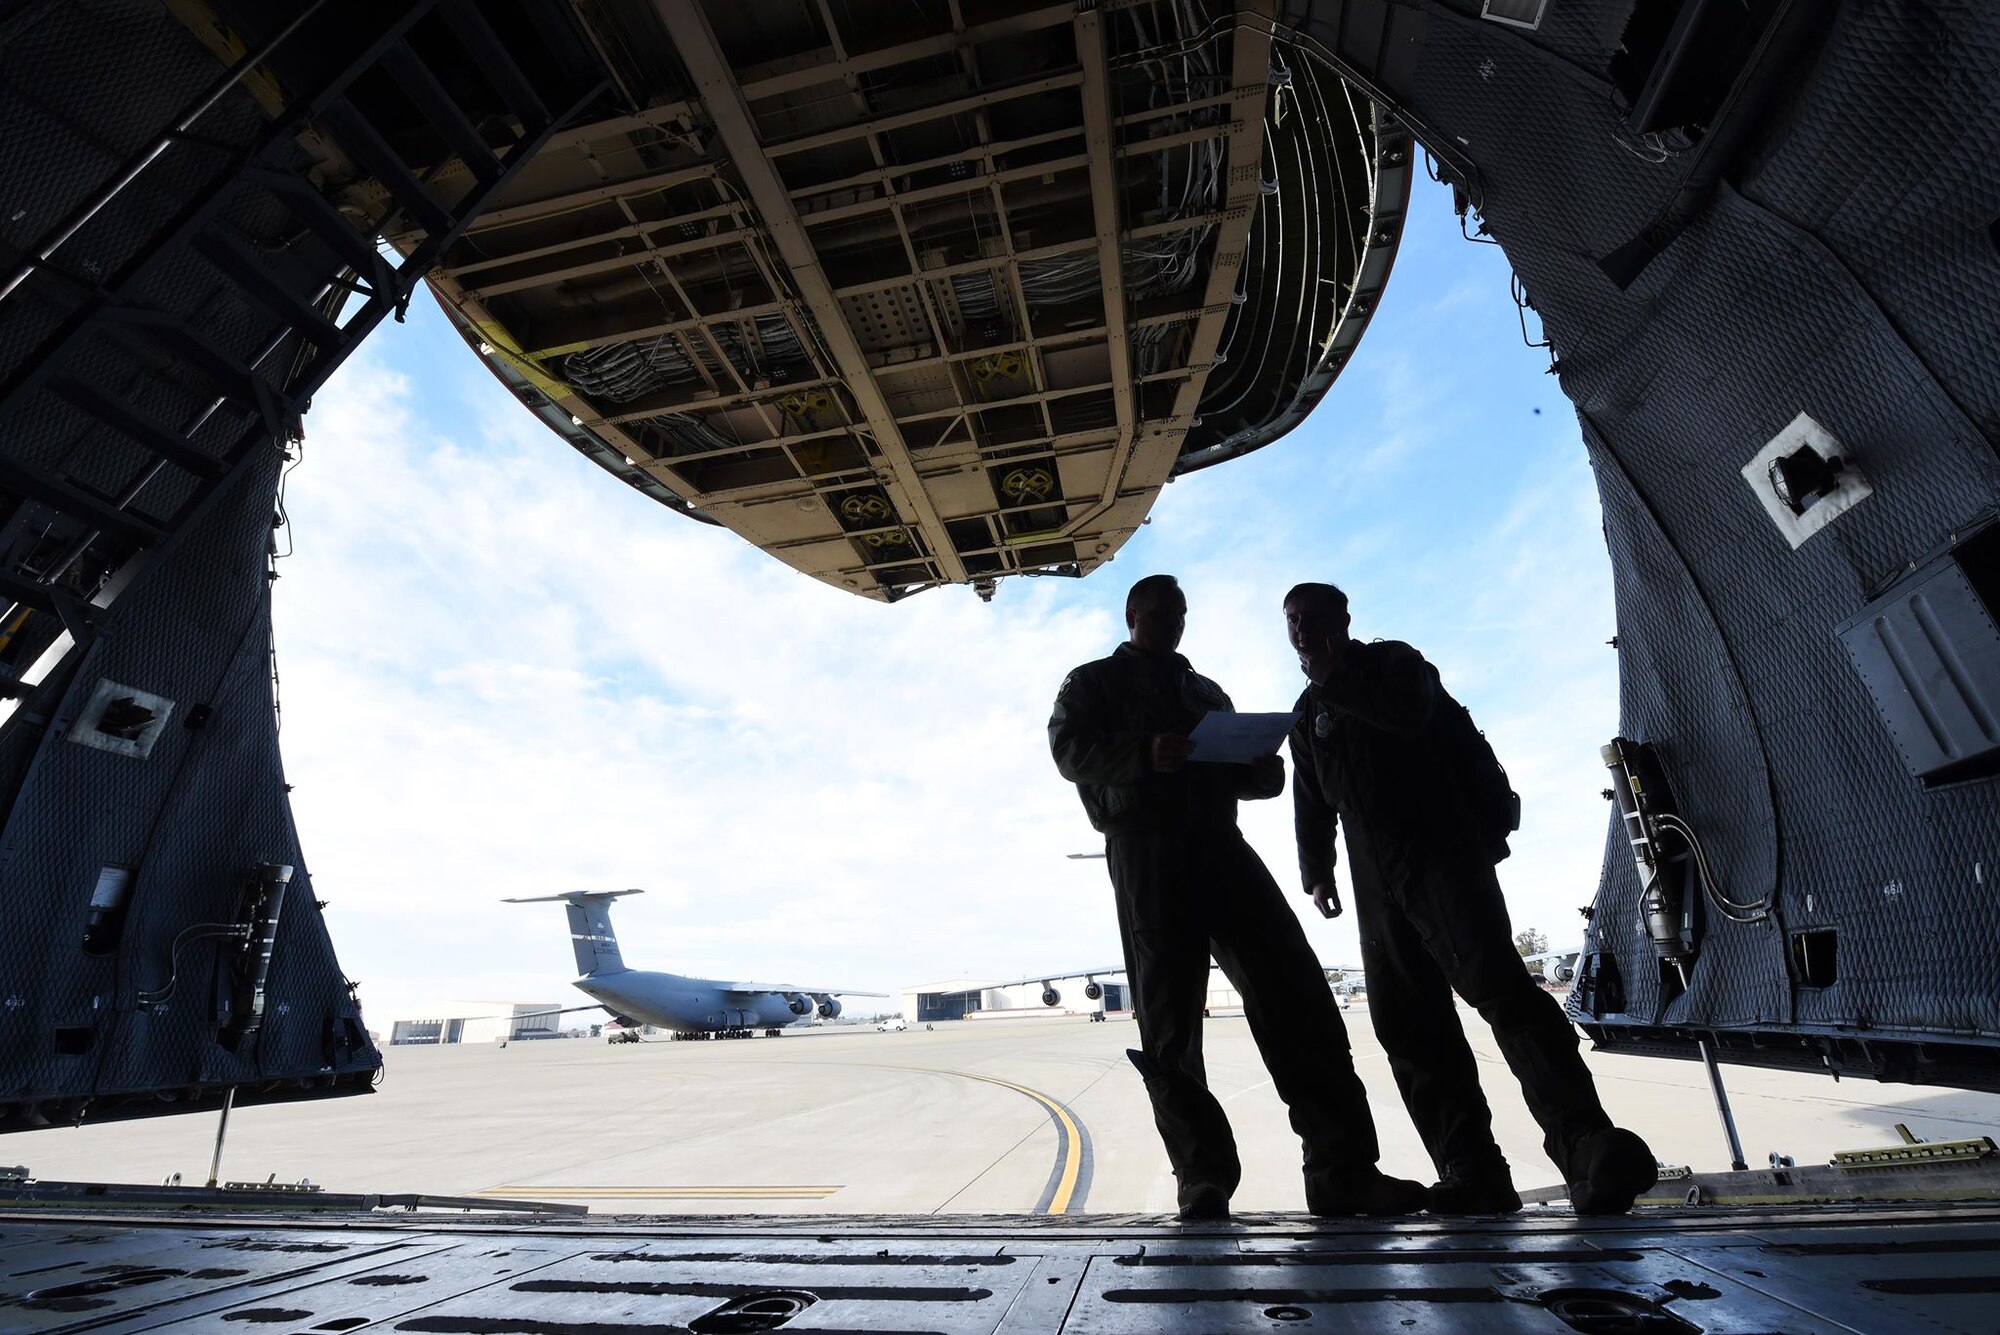 Tech. Sgt. Richard Bline, 312th Airlift Squadron loadmaster, left, and Staff Sgt. Phillip McHenry, 22nd Airlift Squadron loadmaster, right, discuss loading four U.S. Army UH-60 Black Hawks onto the C-5M Super Galaxy they’re inside of January 13 at Travis Air Force Base, Calif. Bline and McHenry were afforded the rare opportunity to train on loading the aircraft as part of training focusing on full-spectrum readiness. (U.S. Air Force photo by Airman 1st Class Christian Conrad)